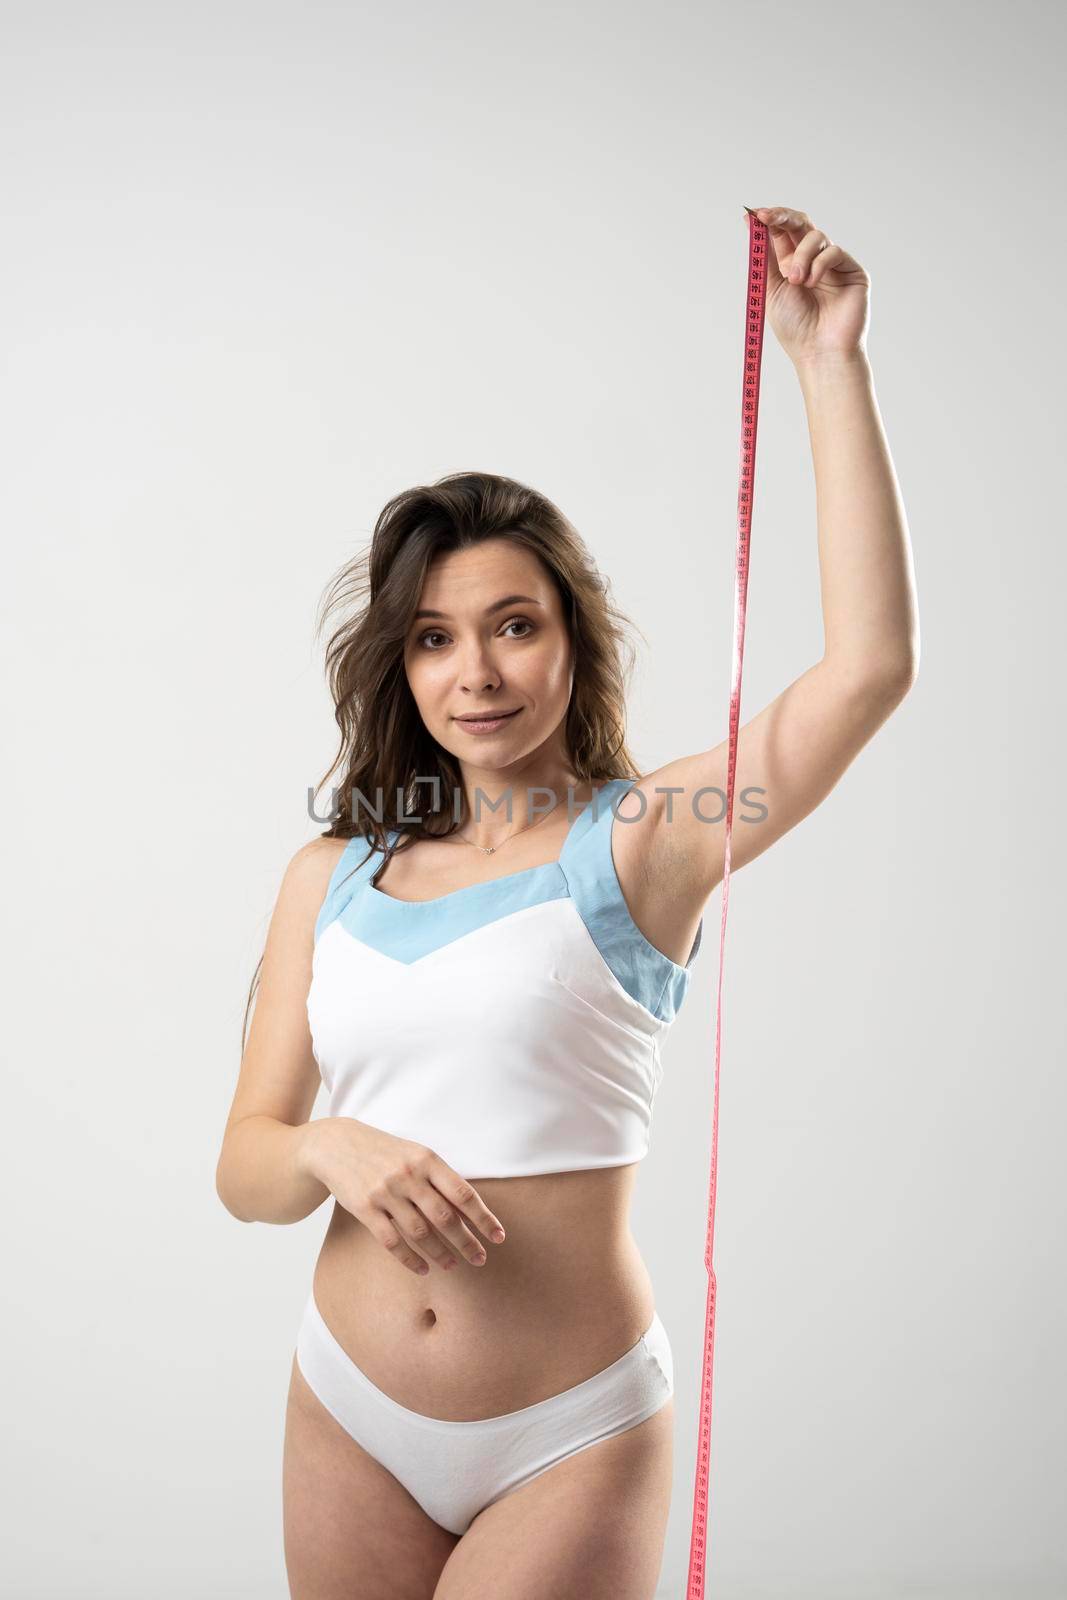 Confused brunette woman with slim body in white underwear on a diet looking in a camera and showing a pink centimeter tape. Healthy lifestyles concept. Sport and diet. by vovsht